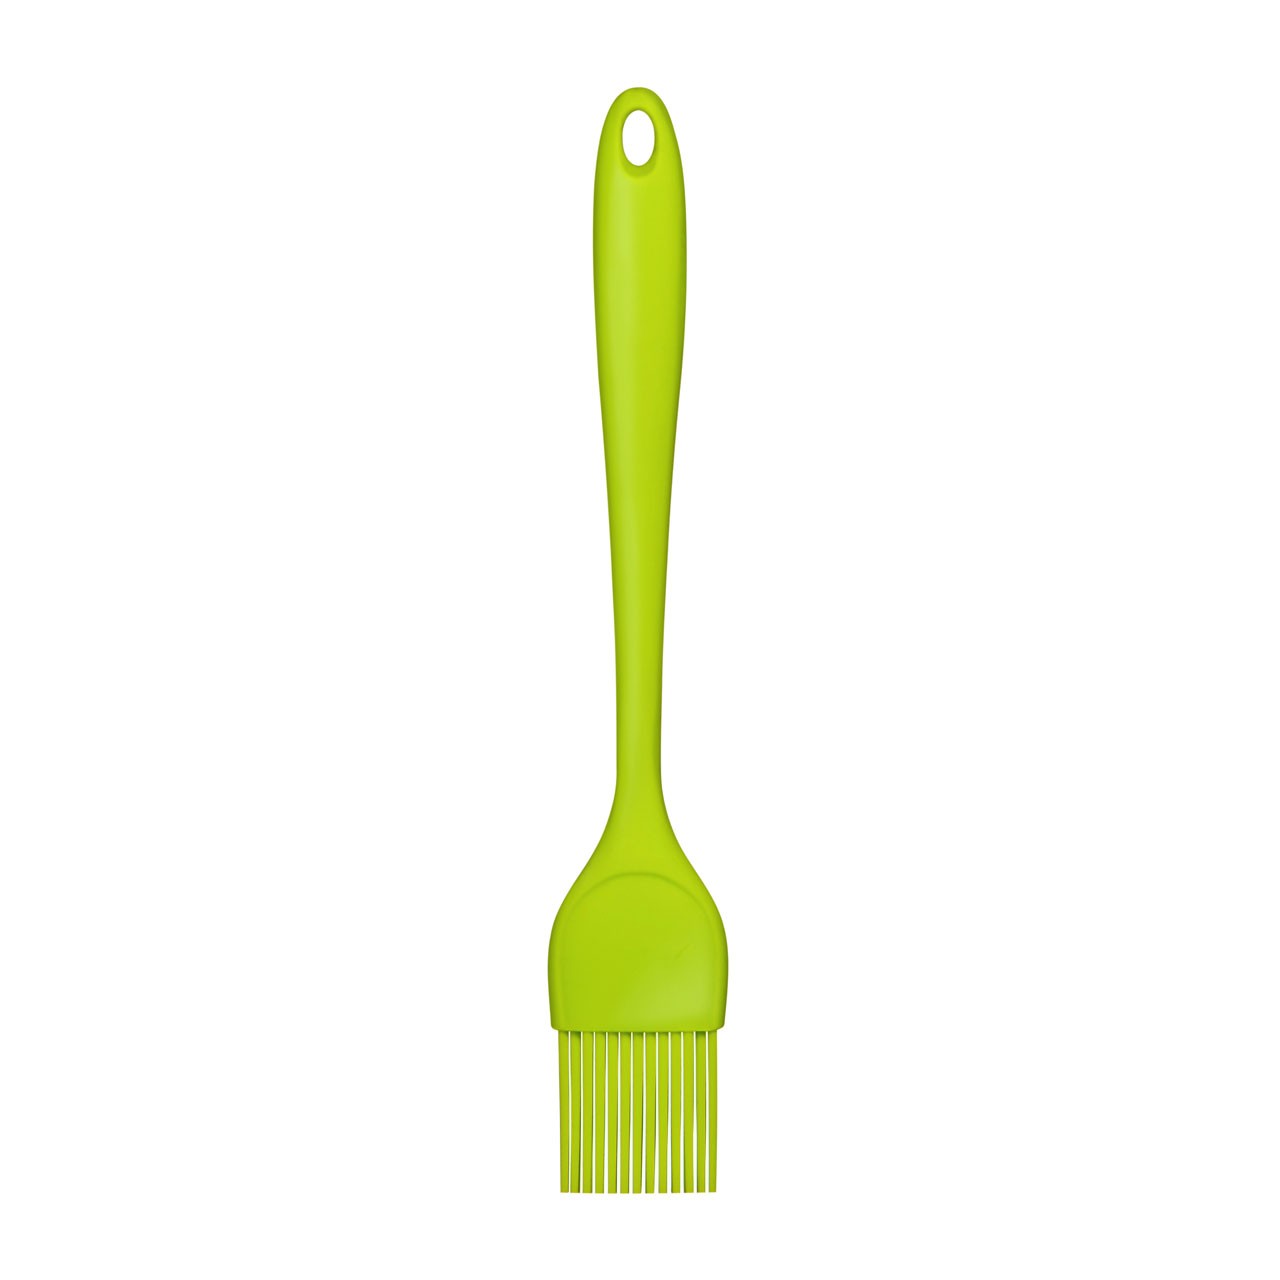 Zing Silicone Pastry Brush - Lime Green